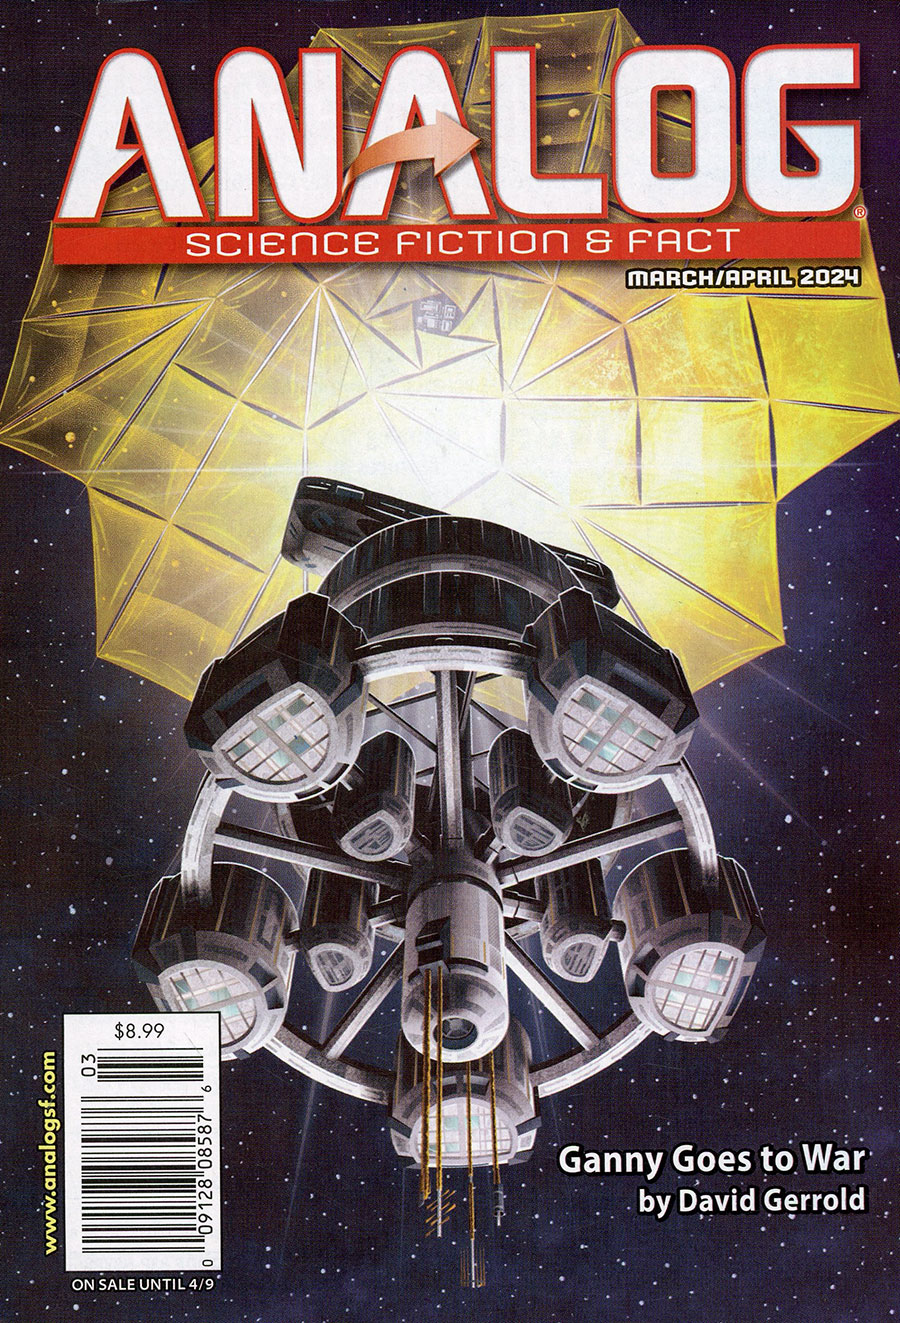 Analog Science Fiction And Fact Vol 94 #3 / #4 March / April 2024